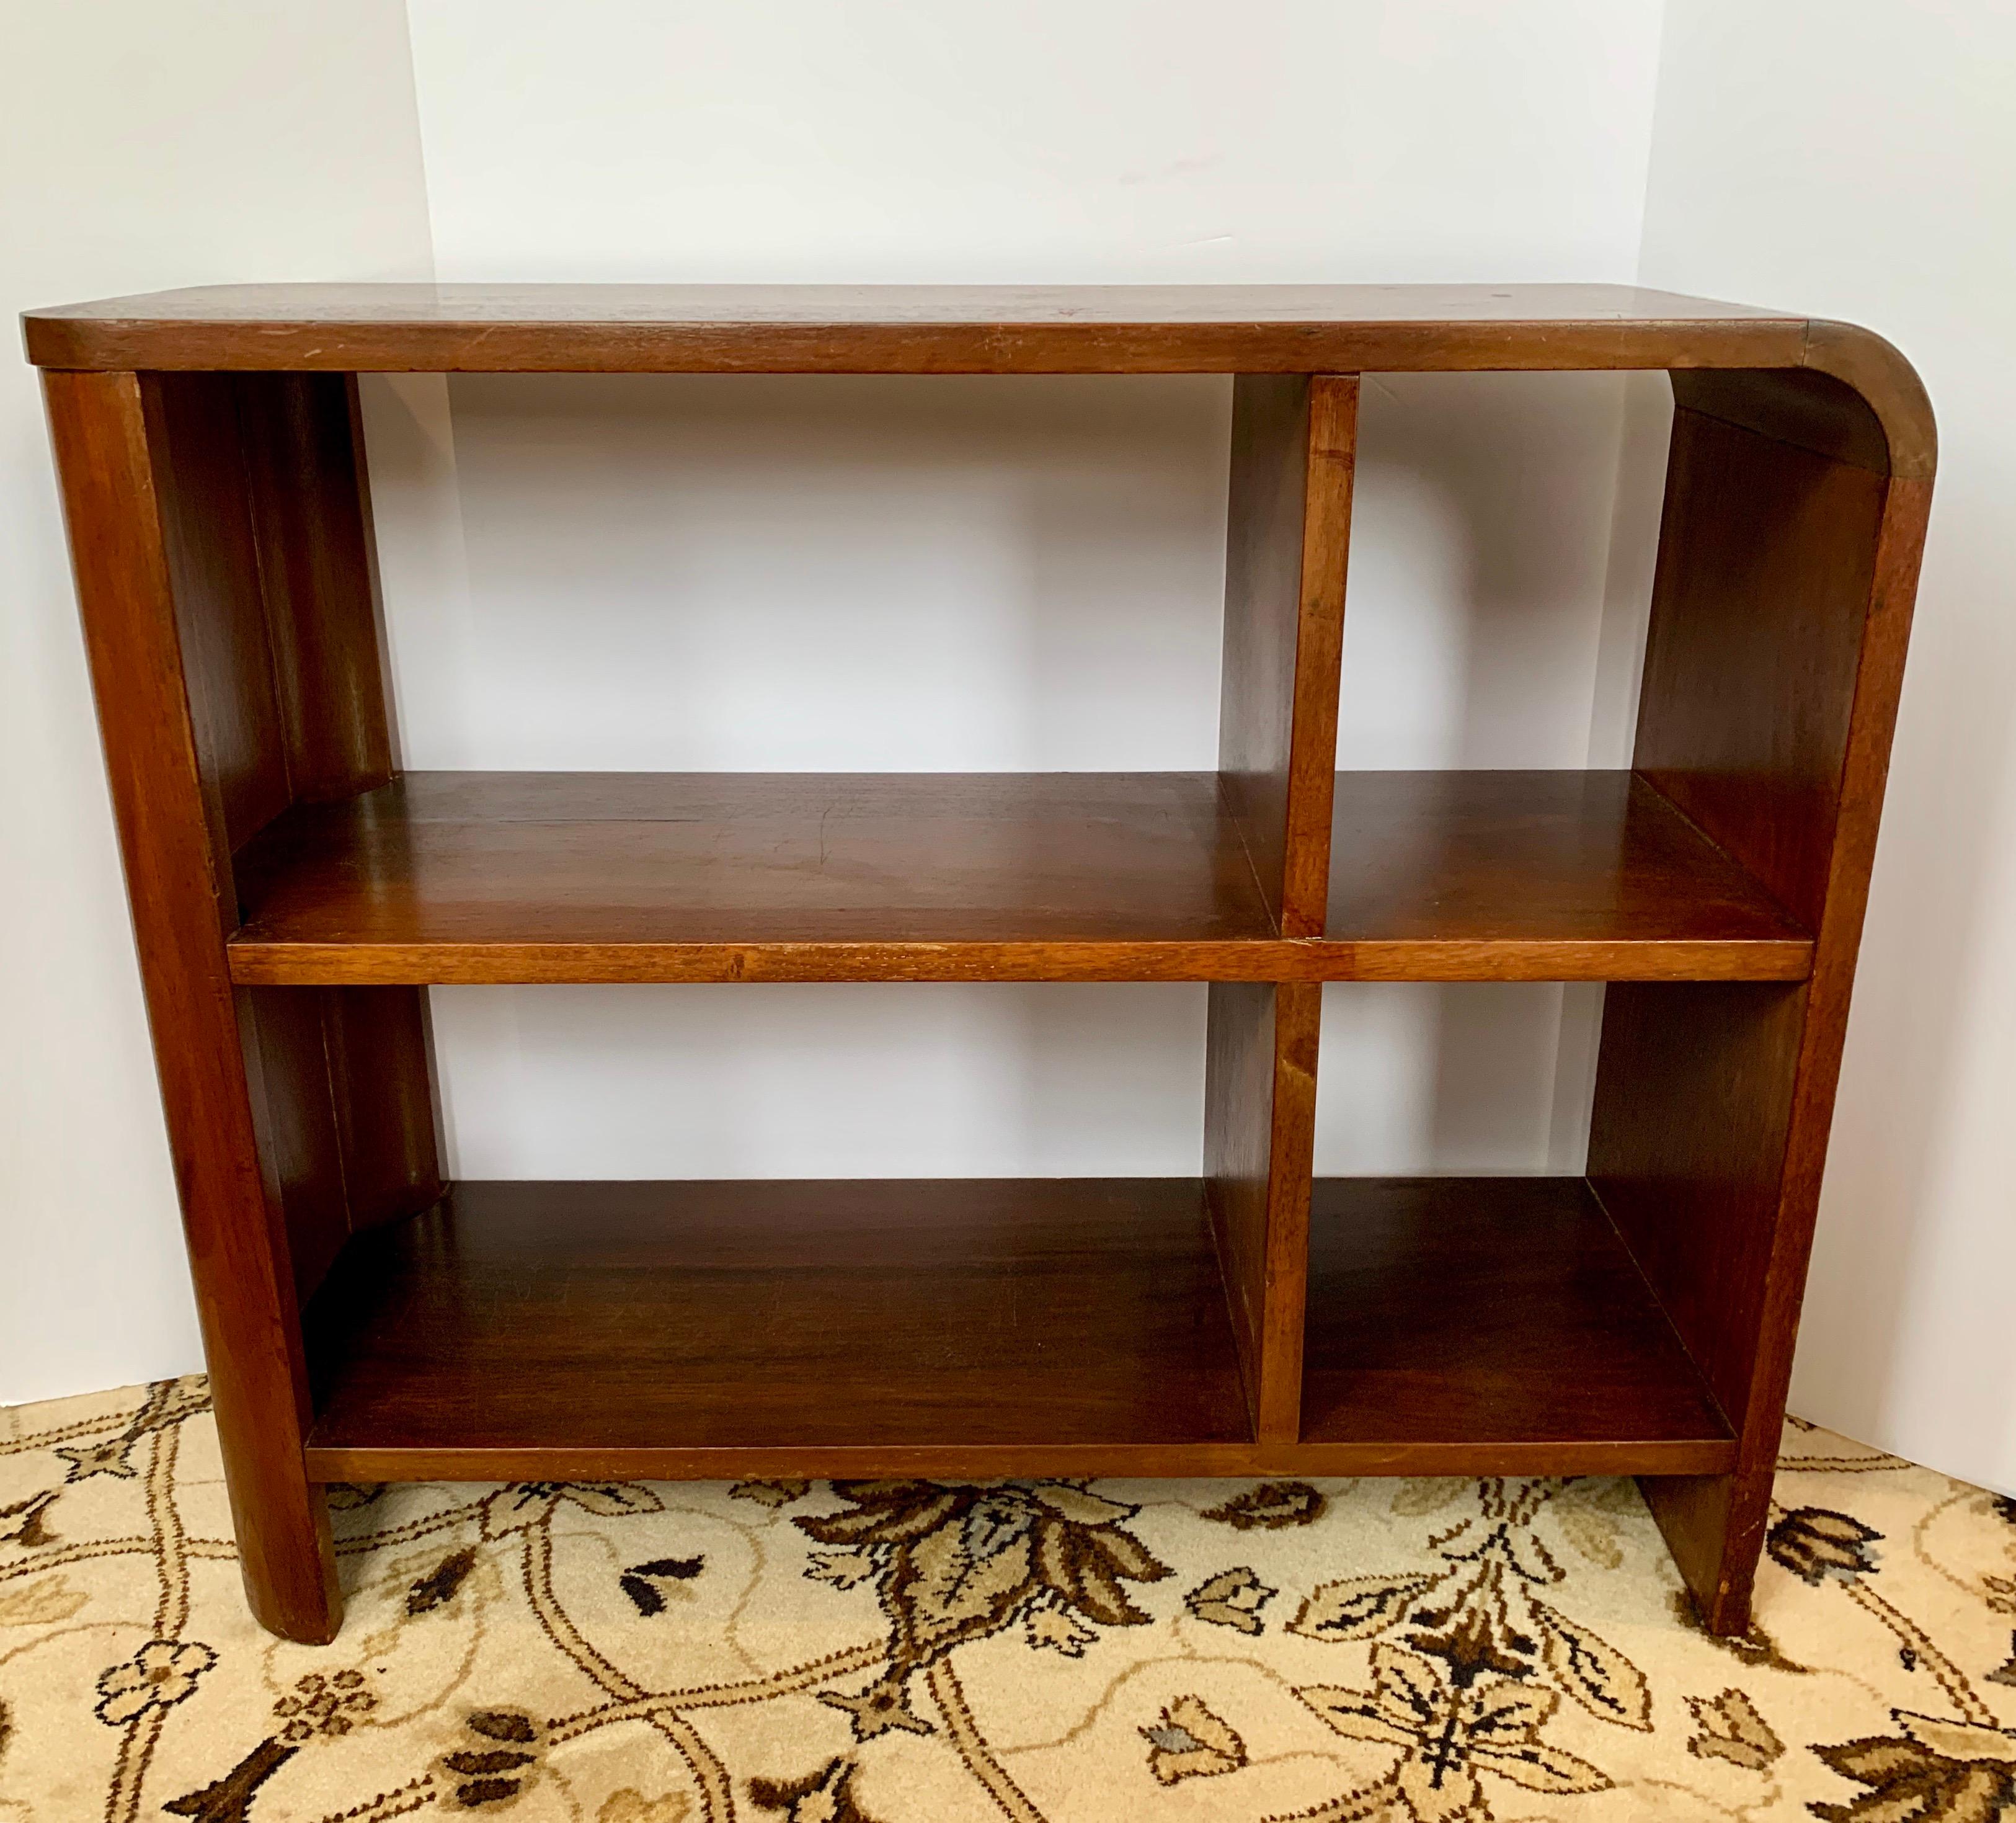 American Pair of Mid-Century Modern Walnut Bookshelves Nightstands End Tables Bookcases